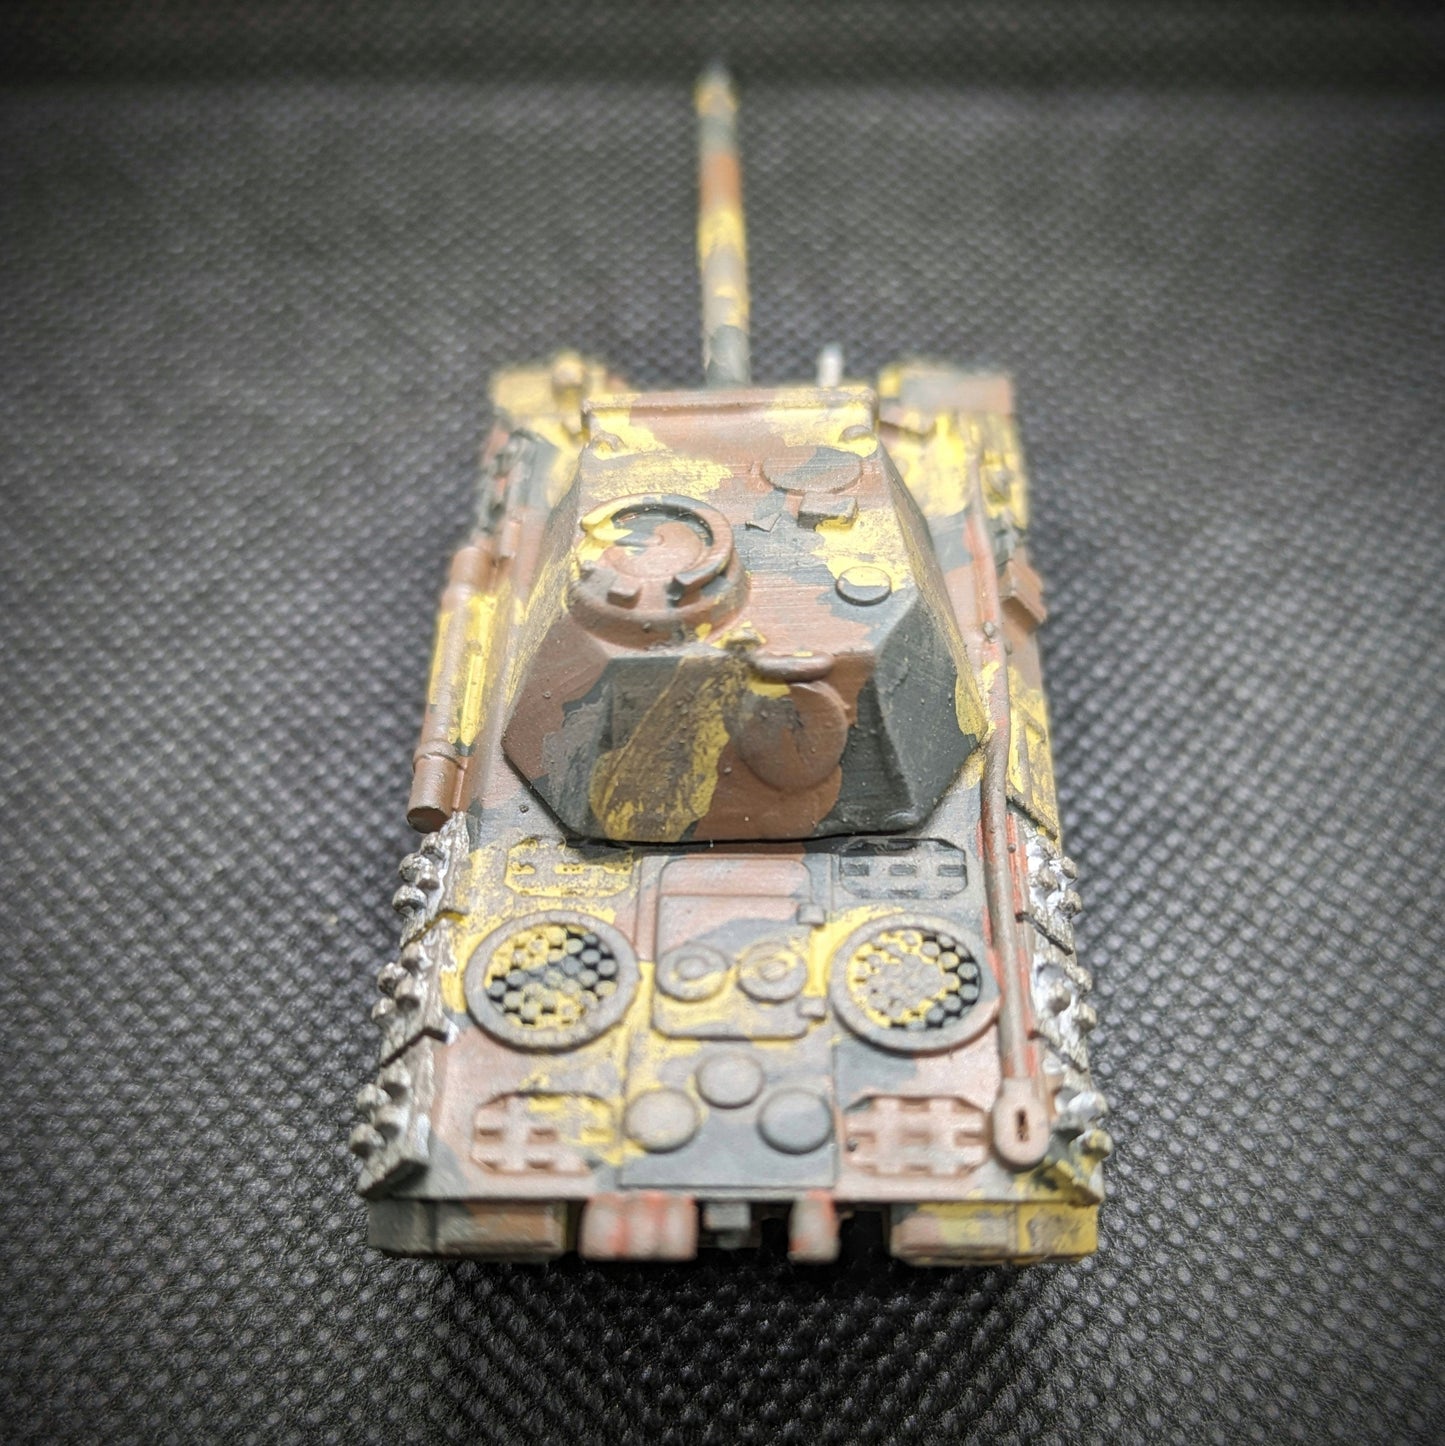 Panther Tank 15mm/1:100 Scale